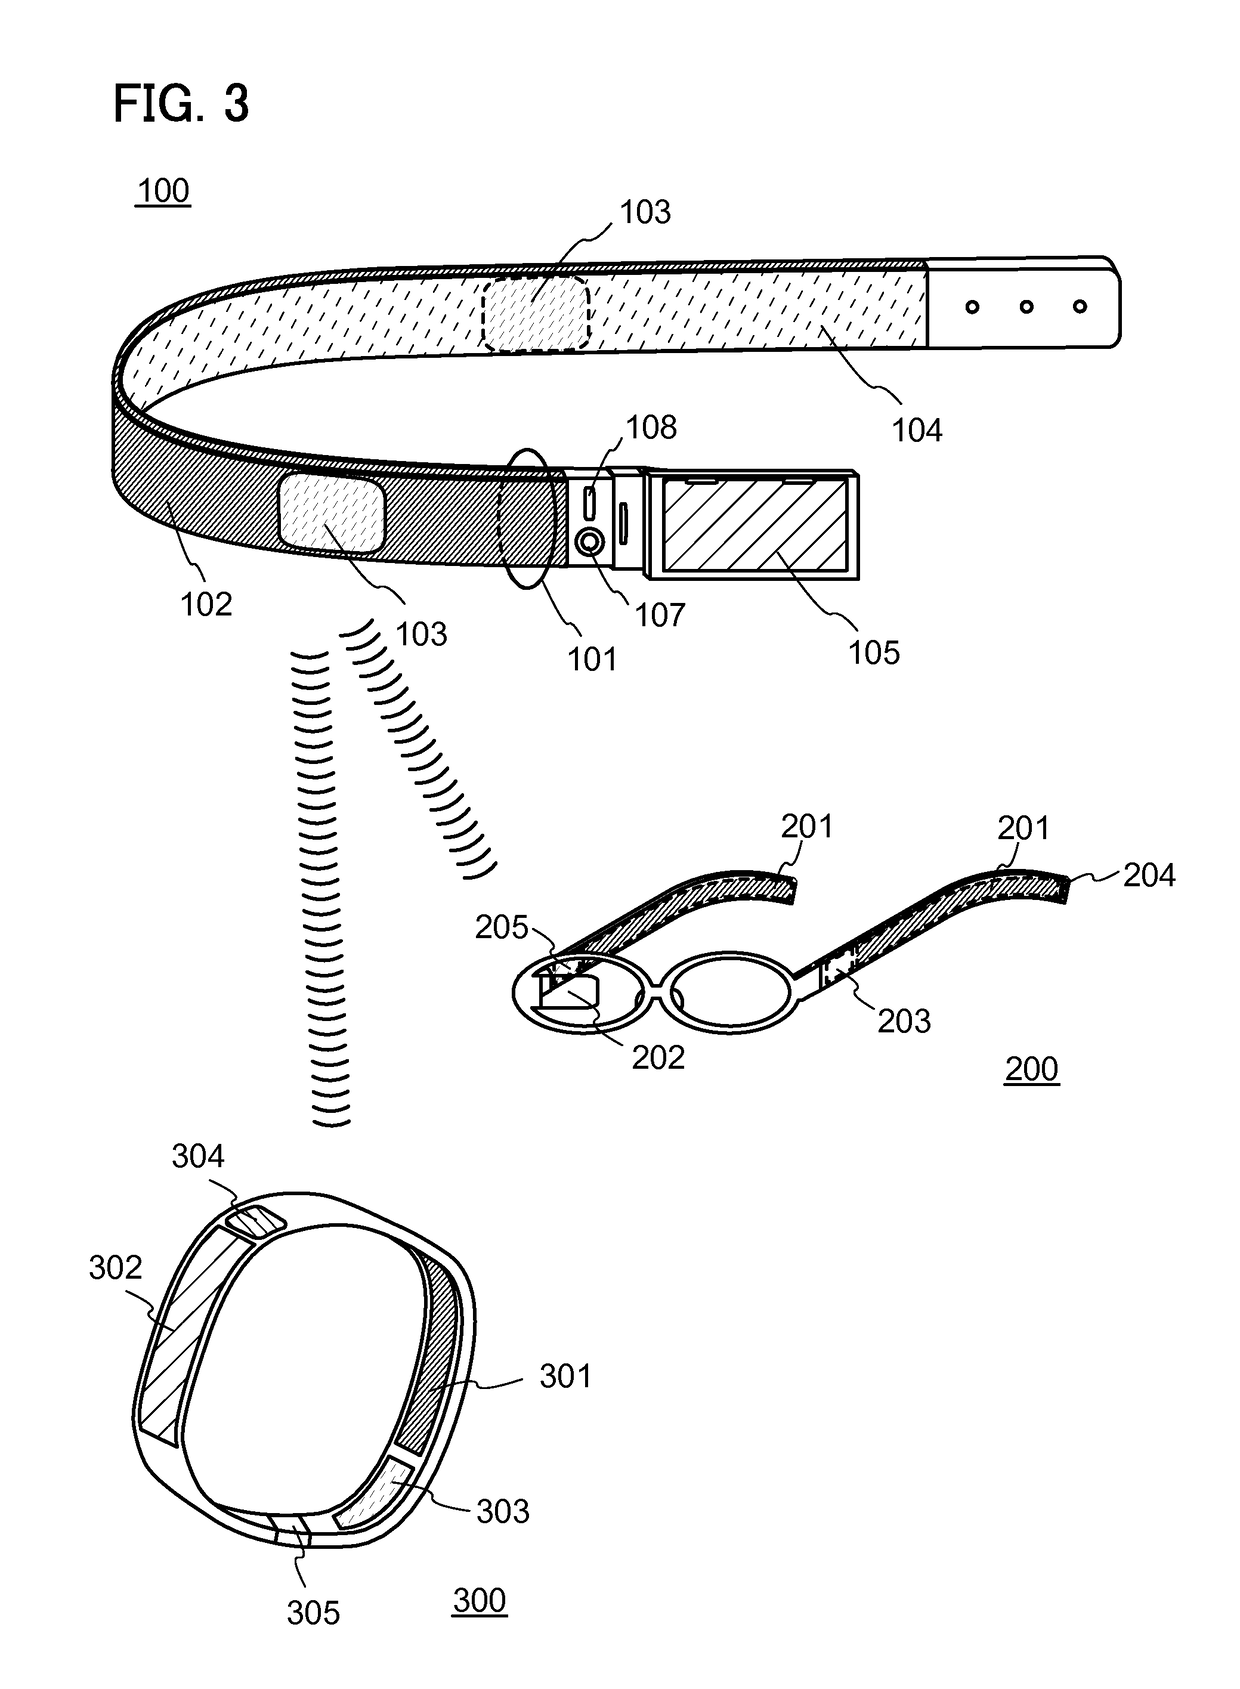 Power supply belt containing flexible battery and power generation means for supplying power to portable electronic devices, including wearable devices